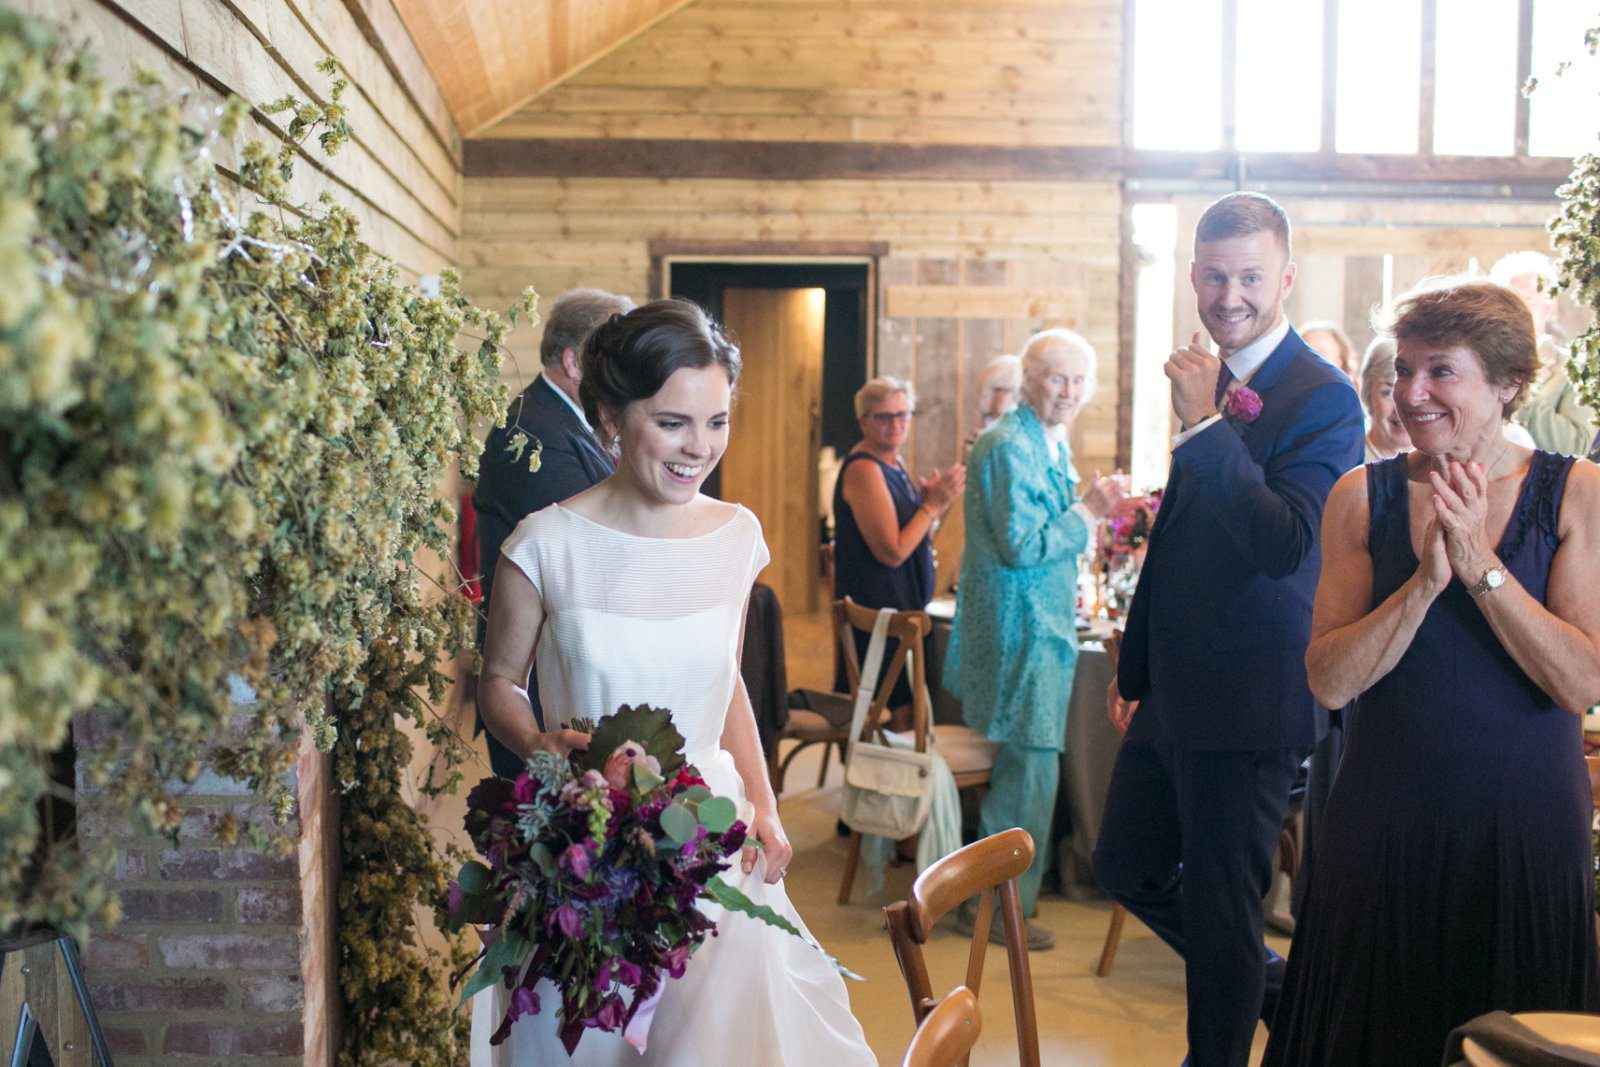 The bride and groom enters the barn at High Billinghurst Farm